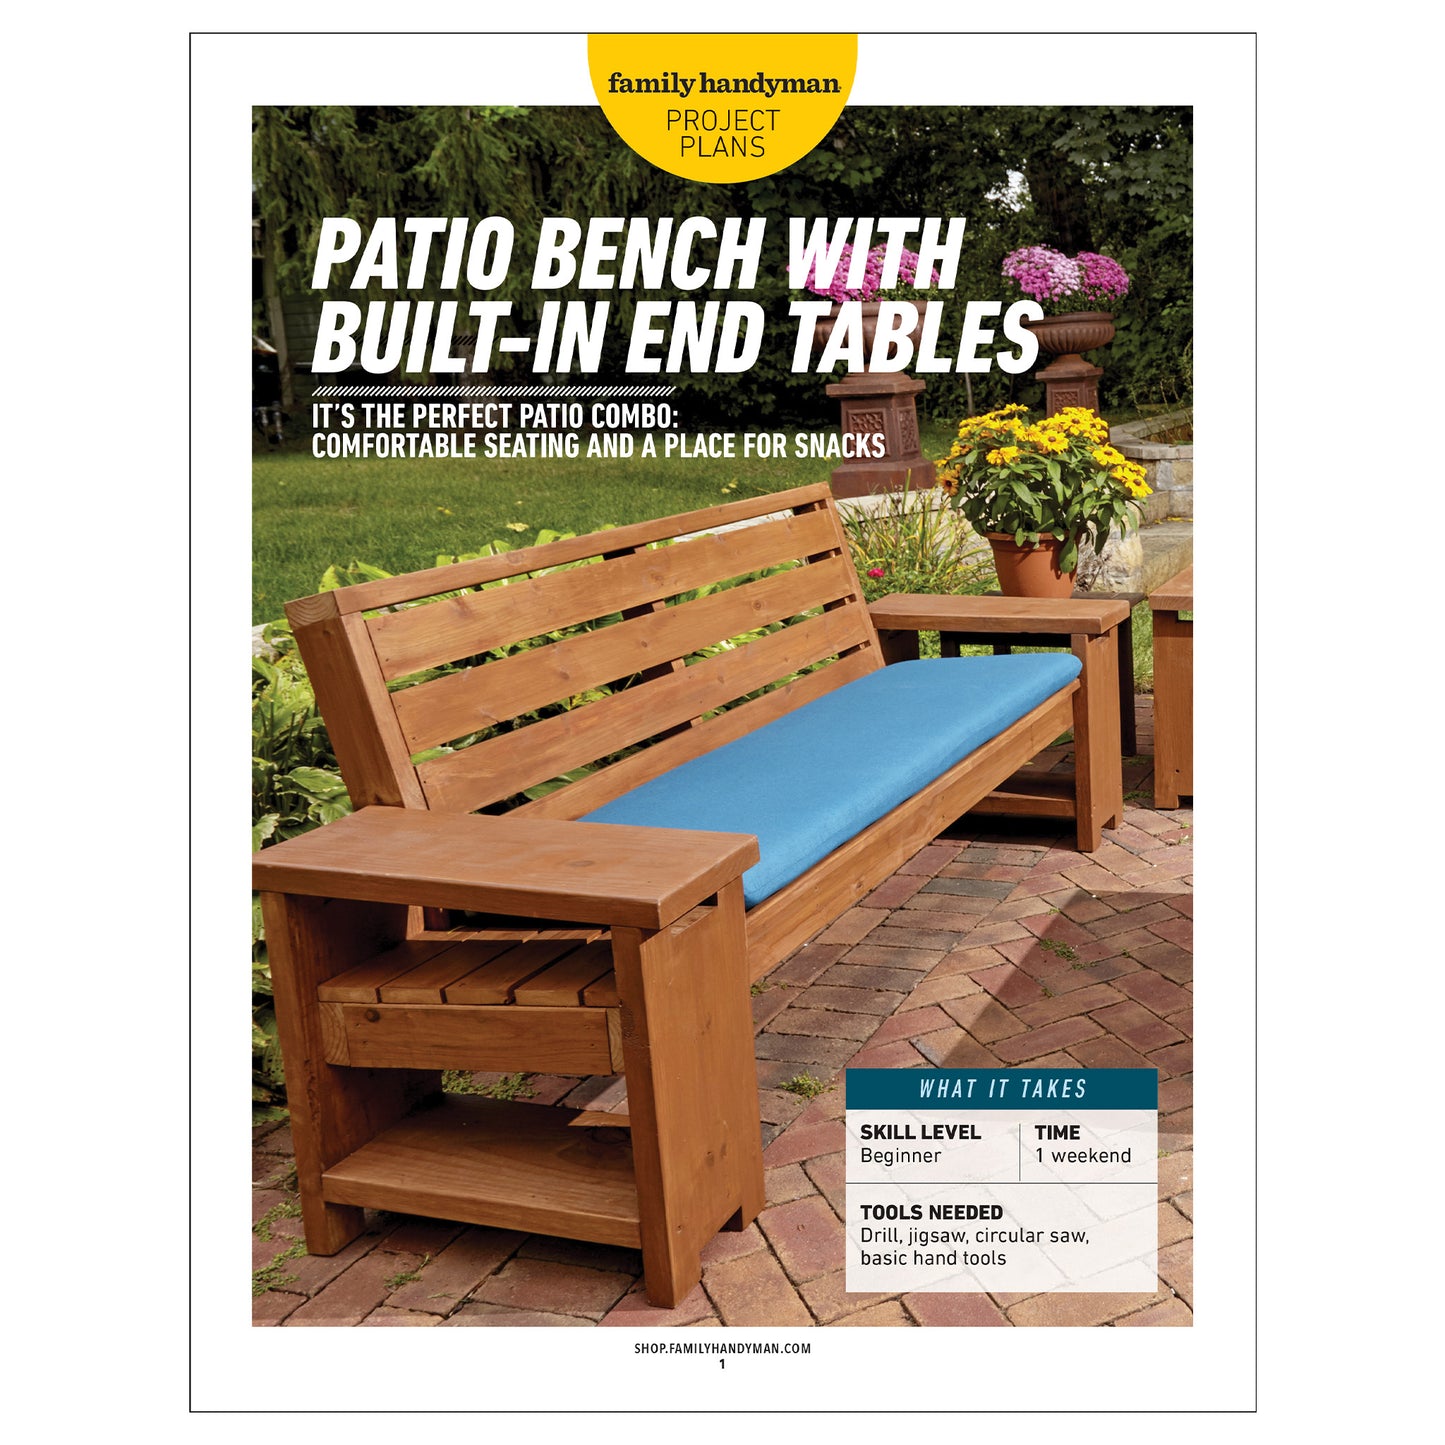 Patio Bench with Built-in End Tables